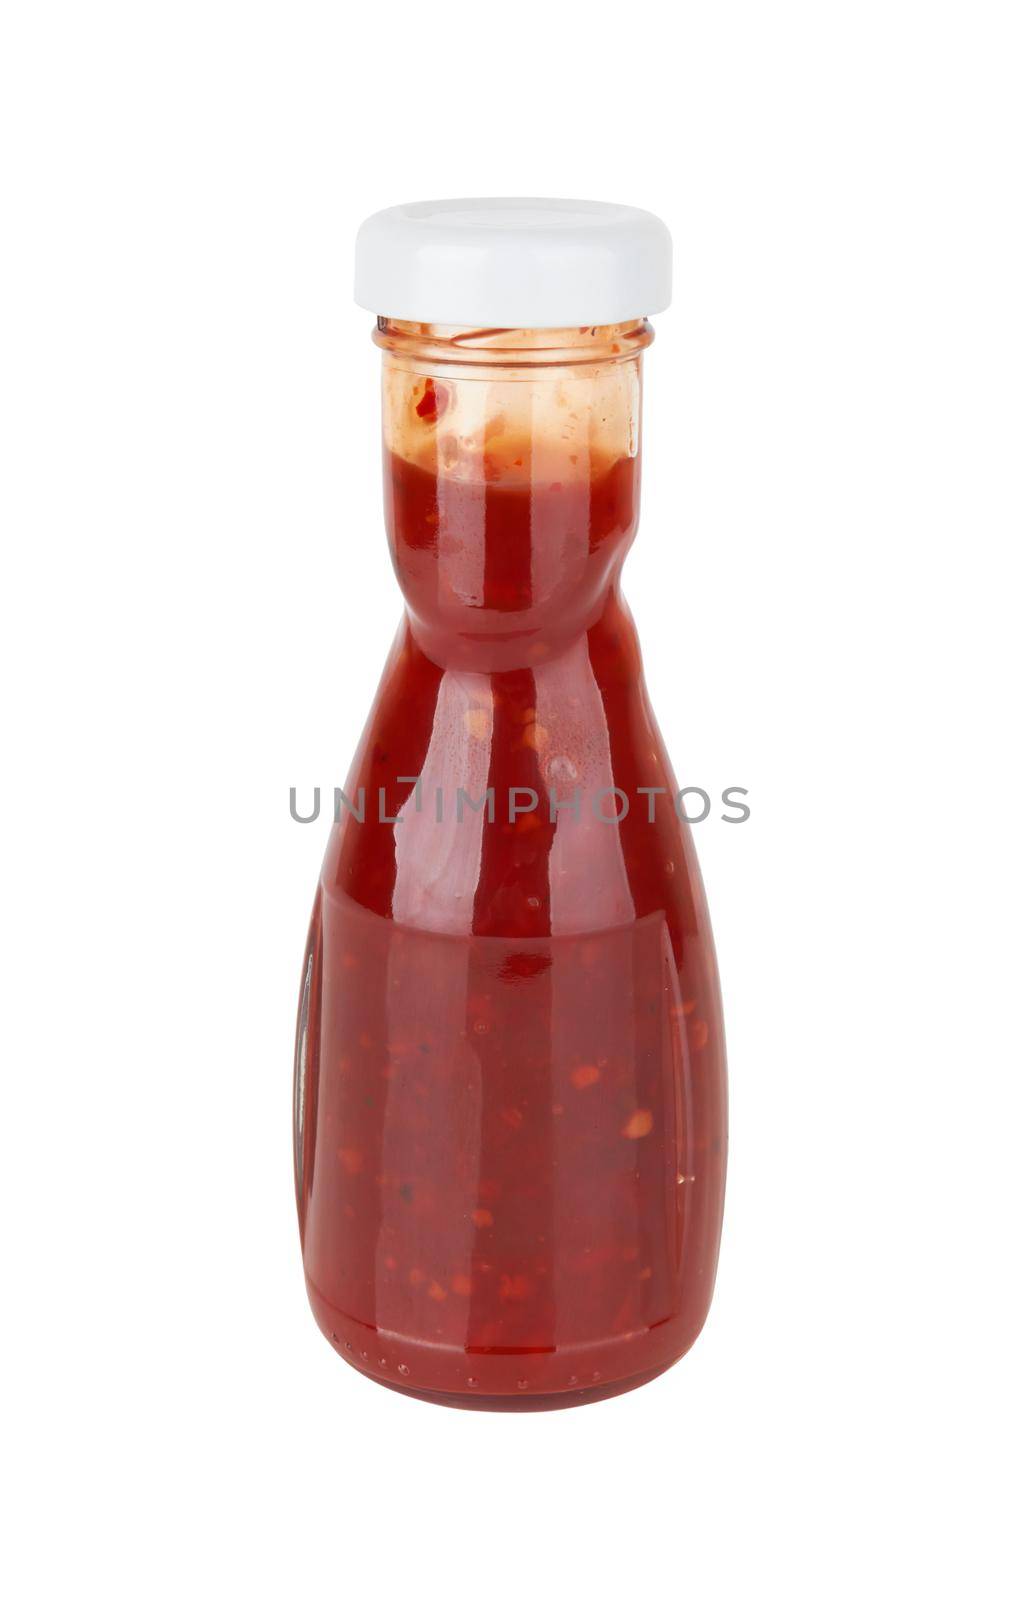 Bottle of tomato sauce by pioneer111